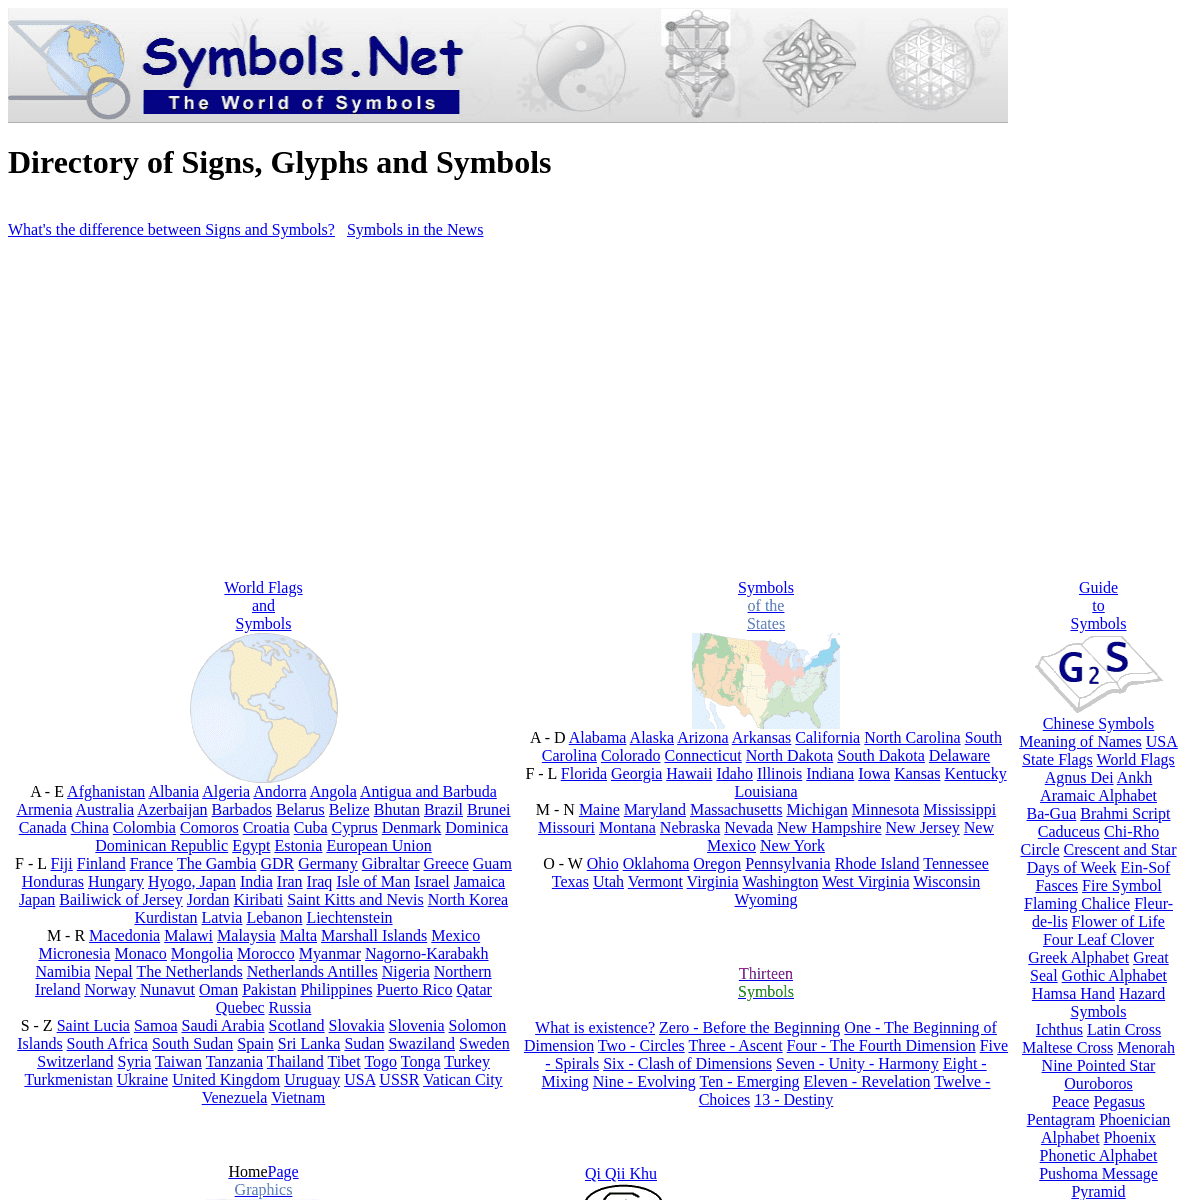 A complete backup of the-symbols.net